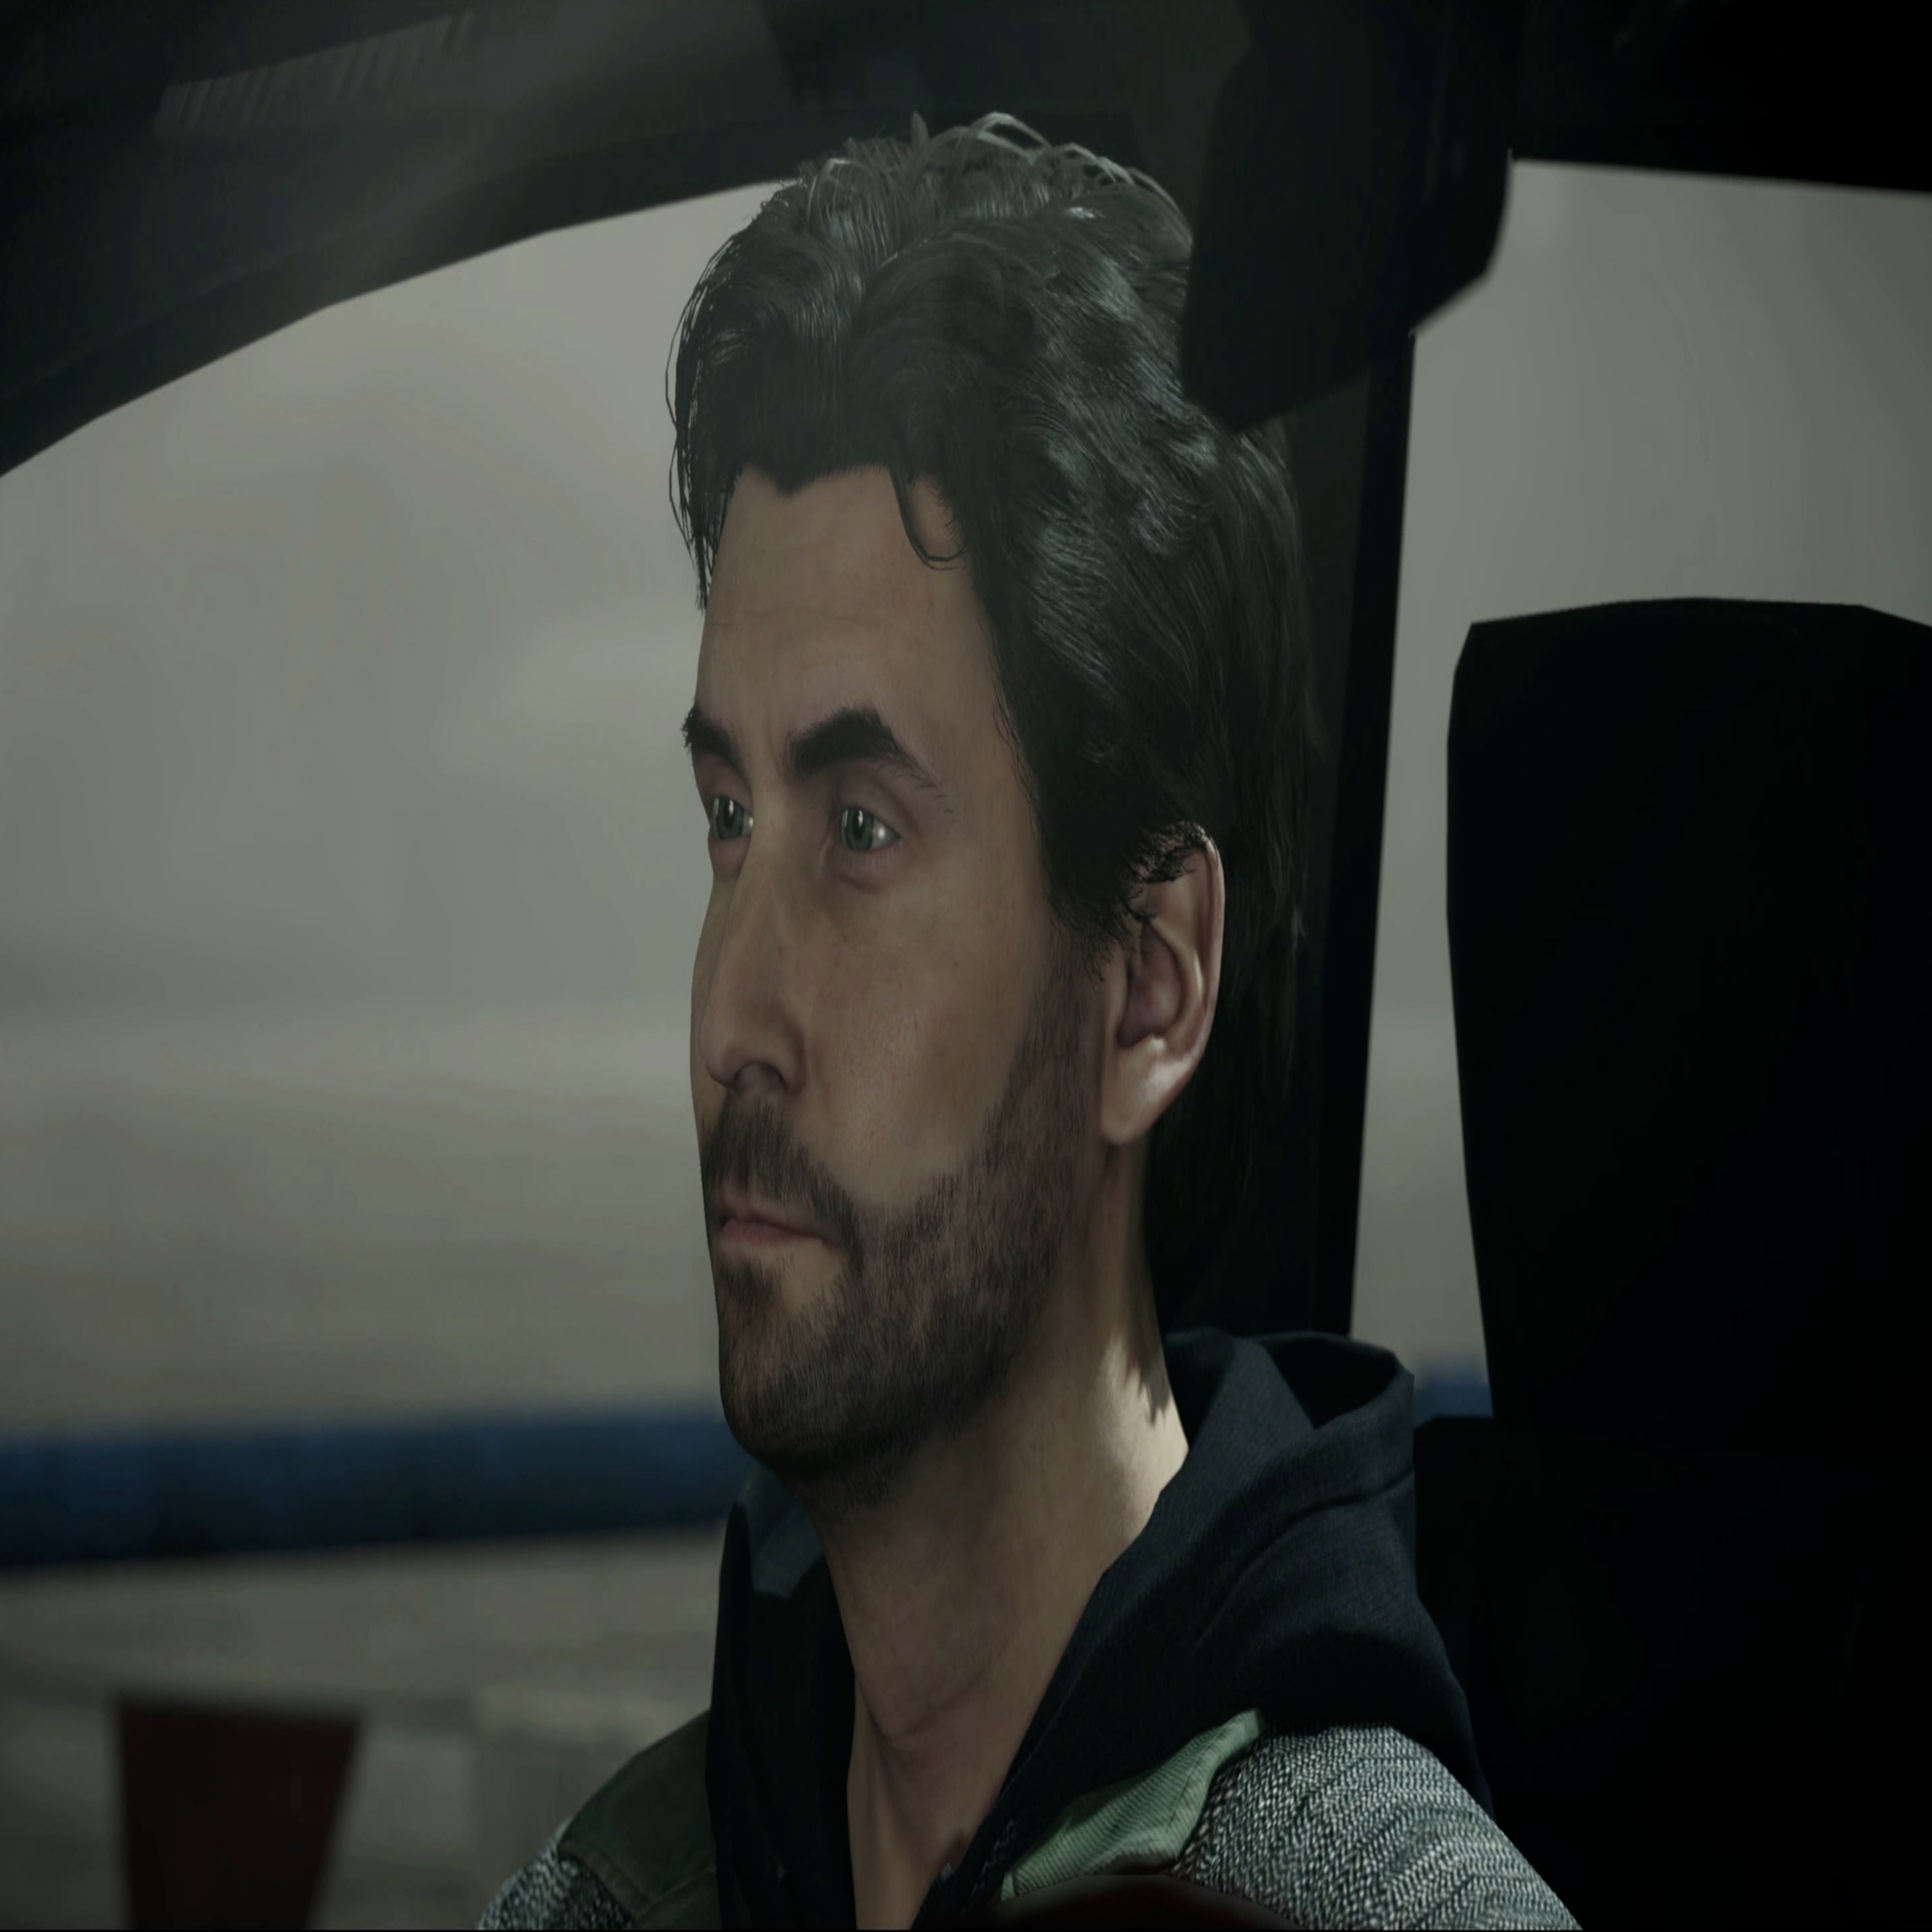 Listings hint an 'Alan Wake' remaster is coming to PS5 and Xbox